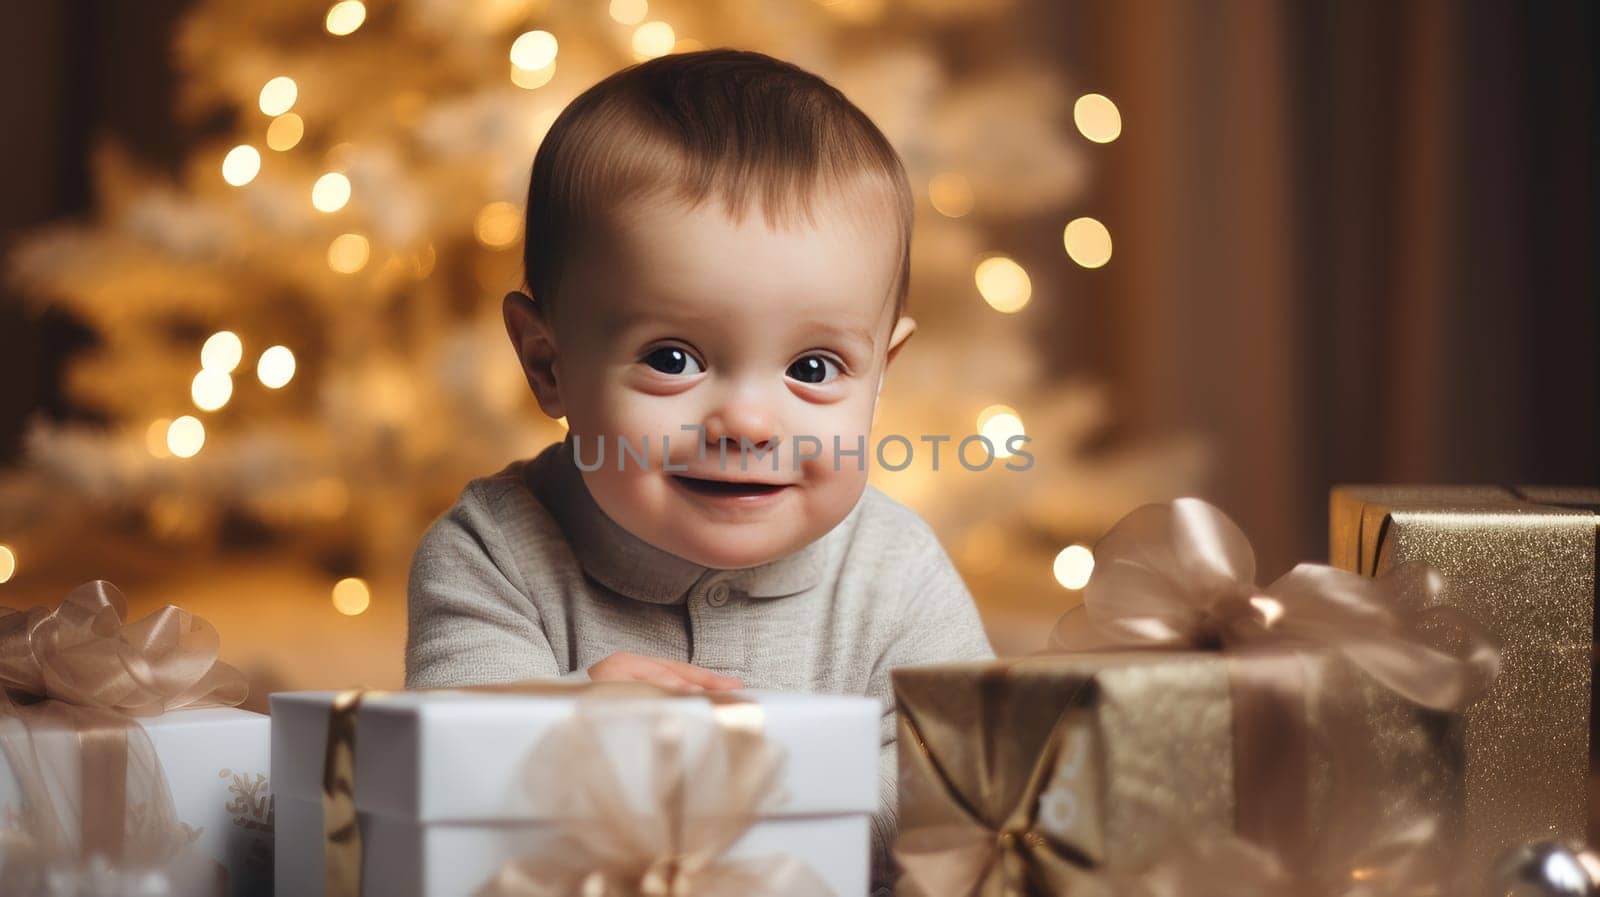 Happy little one with a child with Down syndrome with gifts and lights on the background of a New Year's tree, people with disabilities. Merry Christmas and Merry New Year concept. by Alla_Yurtayeva